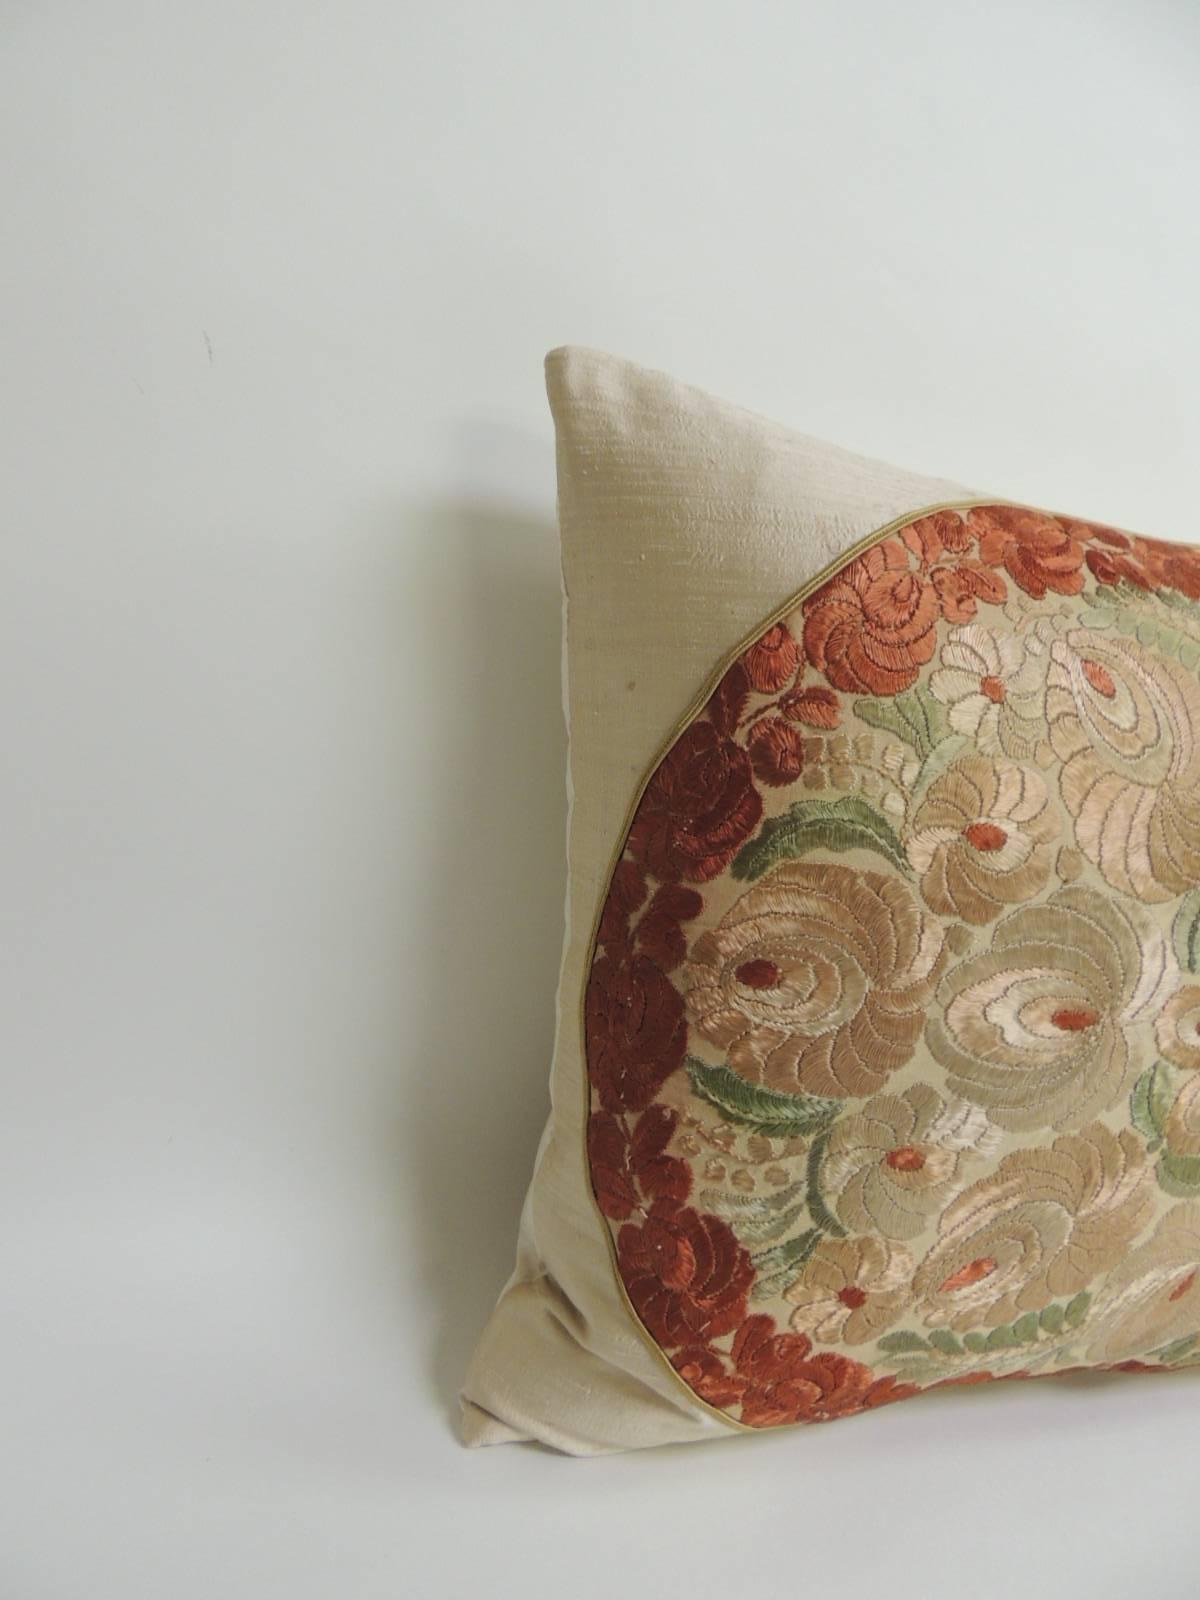 19th century Russian Embroidery floral decorative pillow. Floral silk on silk embroidery framed with golden raw silk and silk cording around the embroidery. Golden silk backing.
Decorative pillow handcrafted and designed in the USA. Closure by